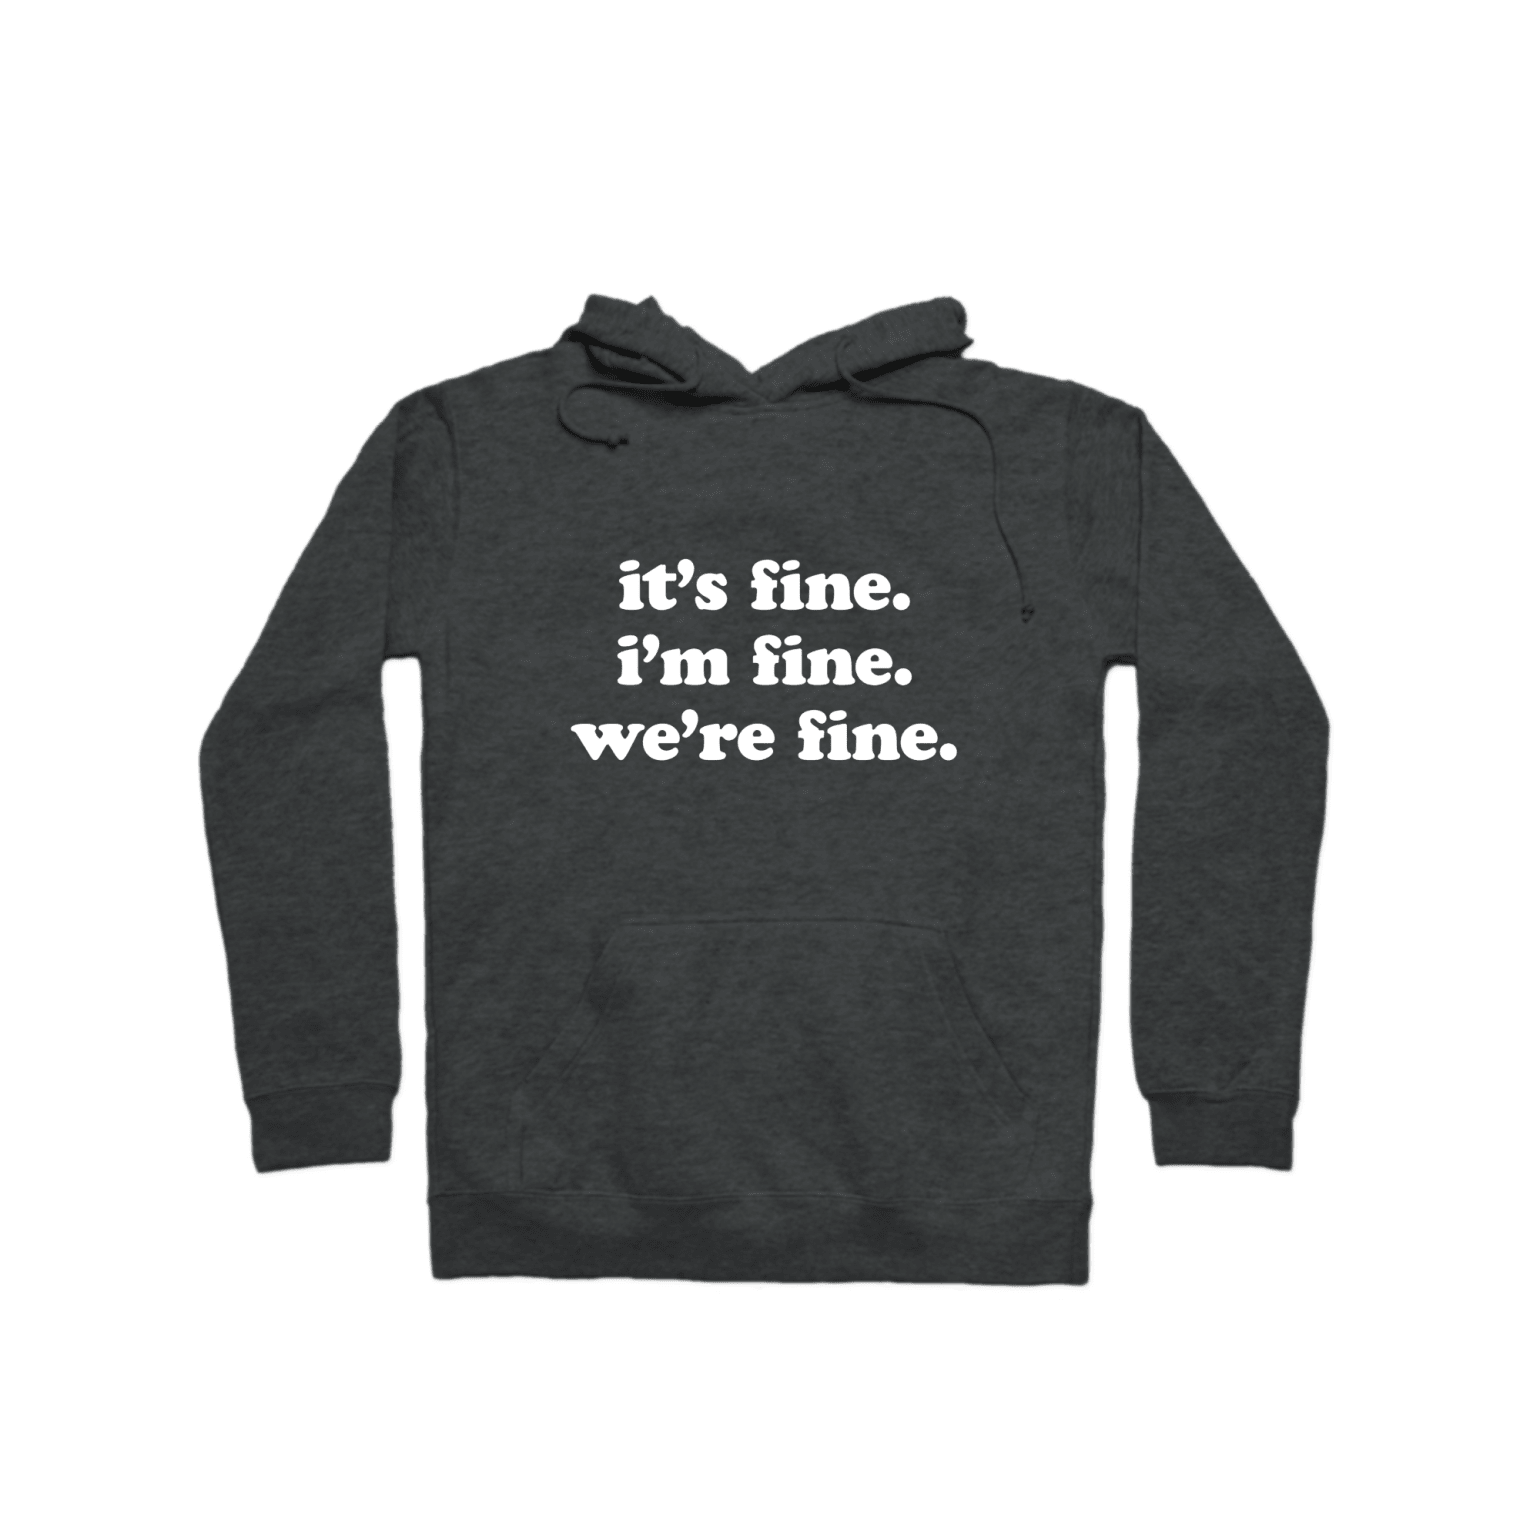 the sweater in gray with &quot;it&#x27;s fine. i&#x27;m fine. we&#x27;re fine.&quot; written on it 